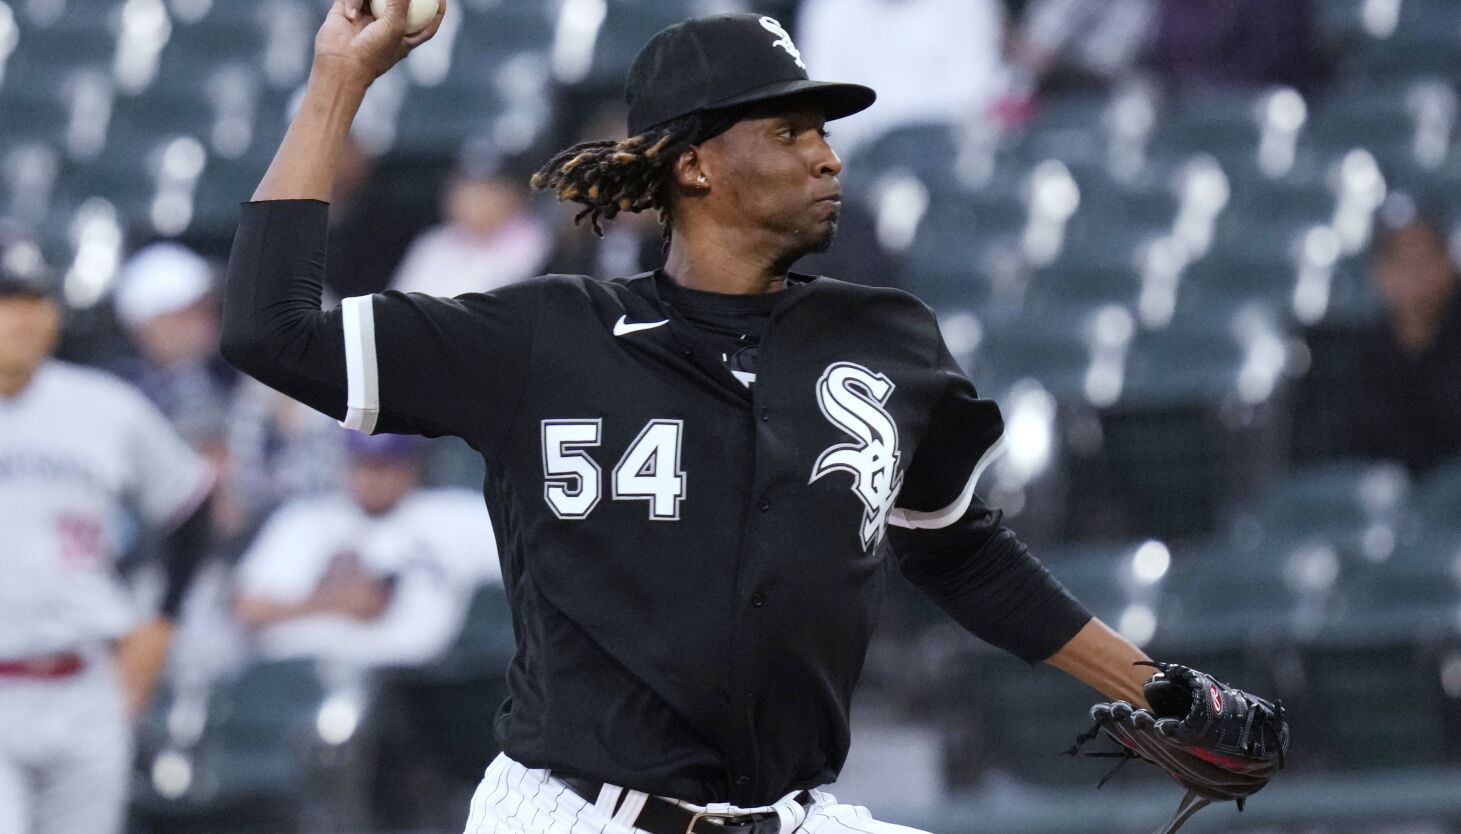 White Sox right-hander Michael Kopech 'on pace' to be ready for start of  season - Chicago Sun-Times